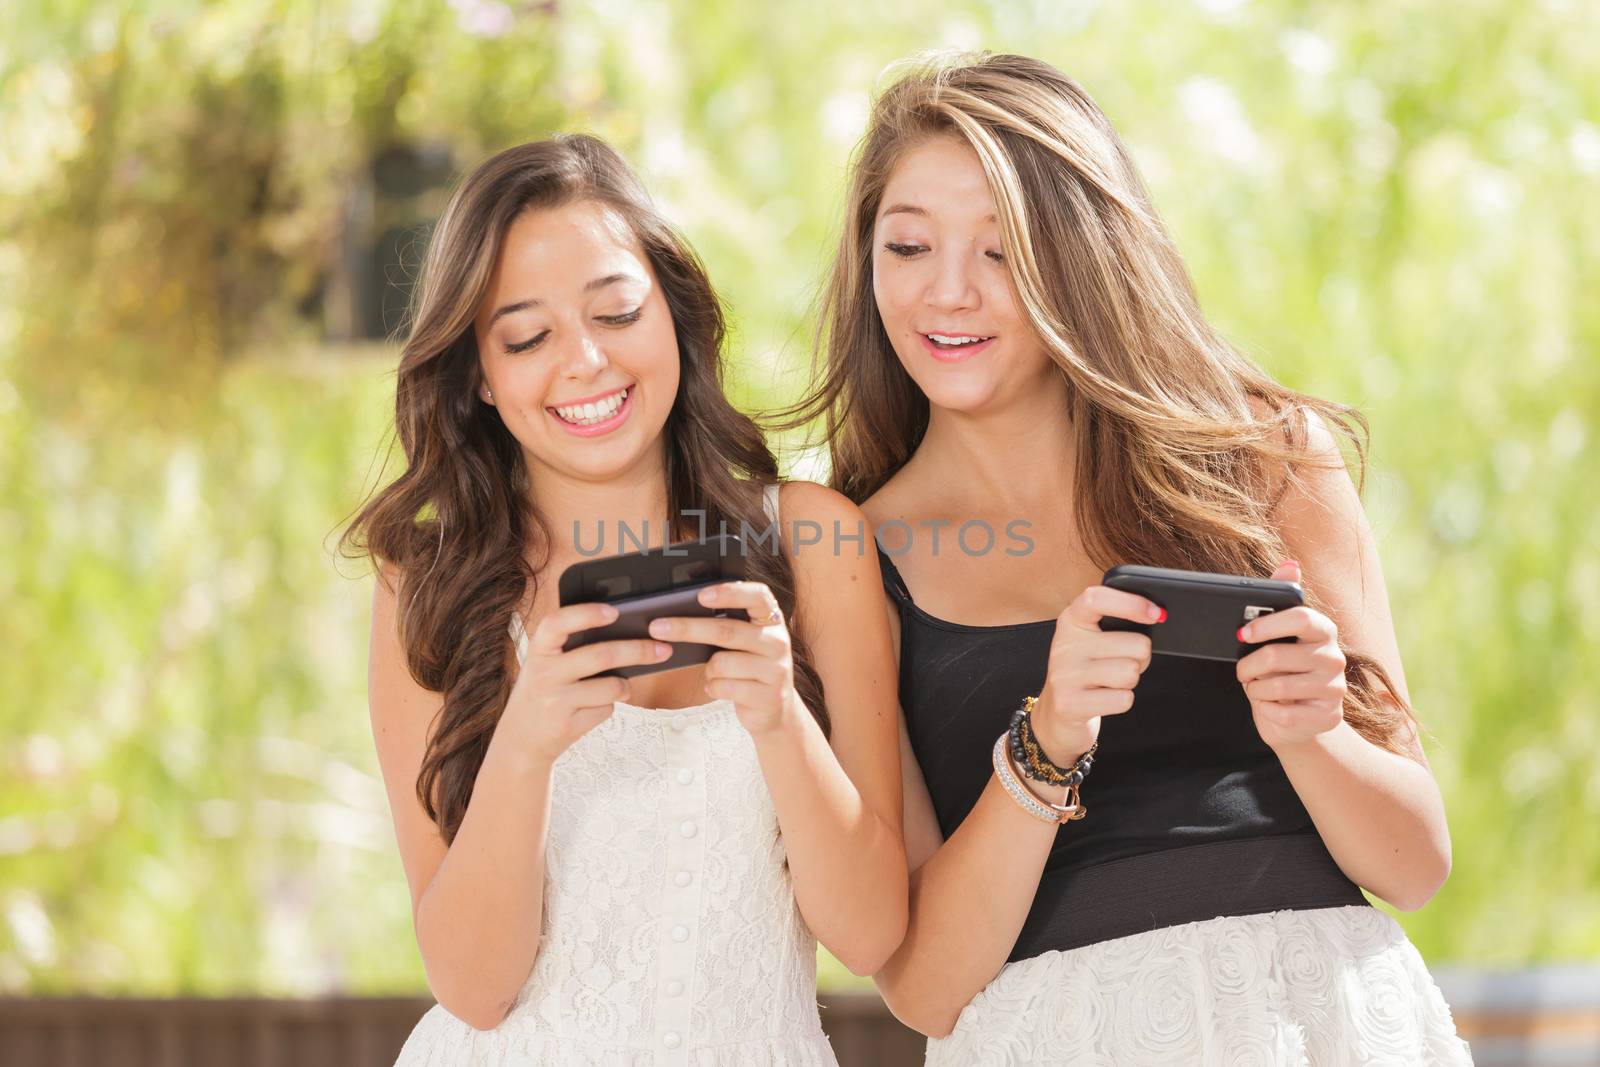 Two Expressive Mixed Race Girlfriends Using Their Smart Cell Phones Outdoors